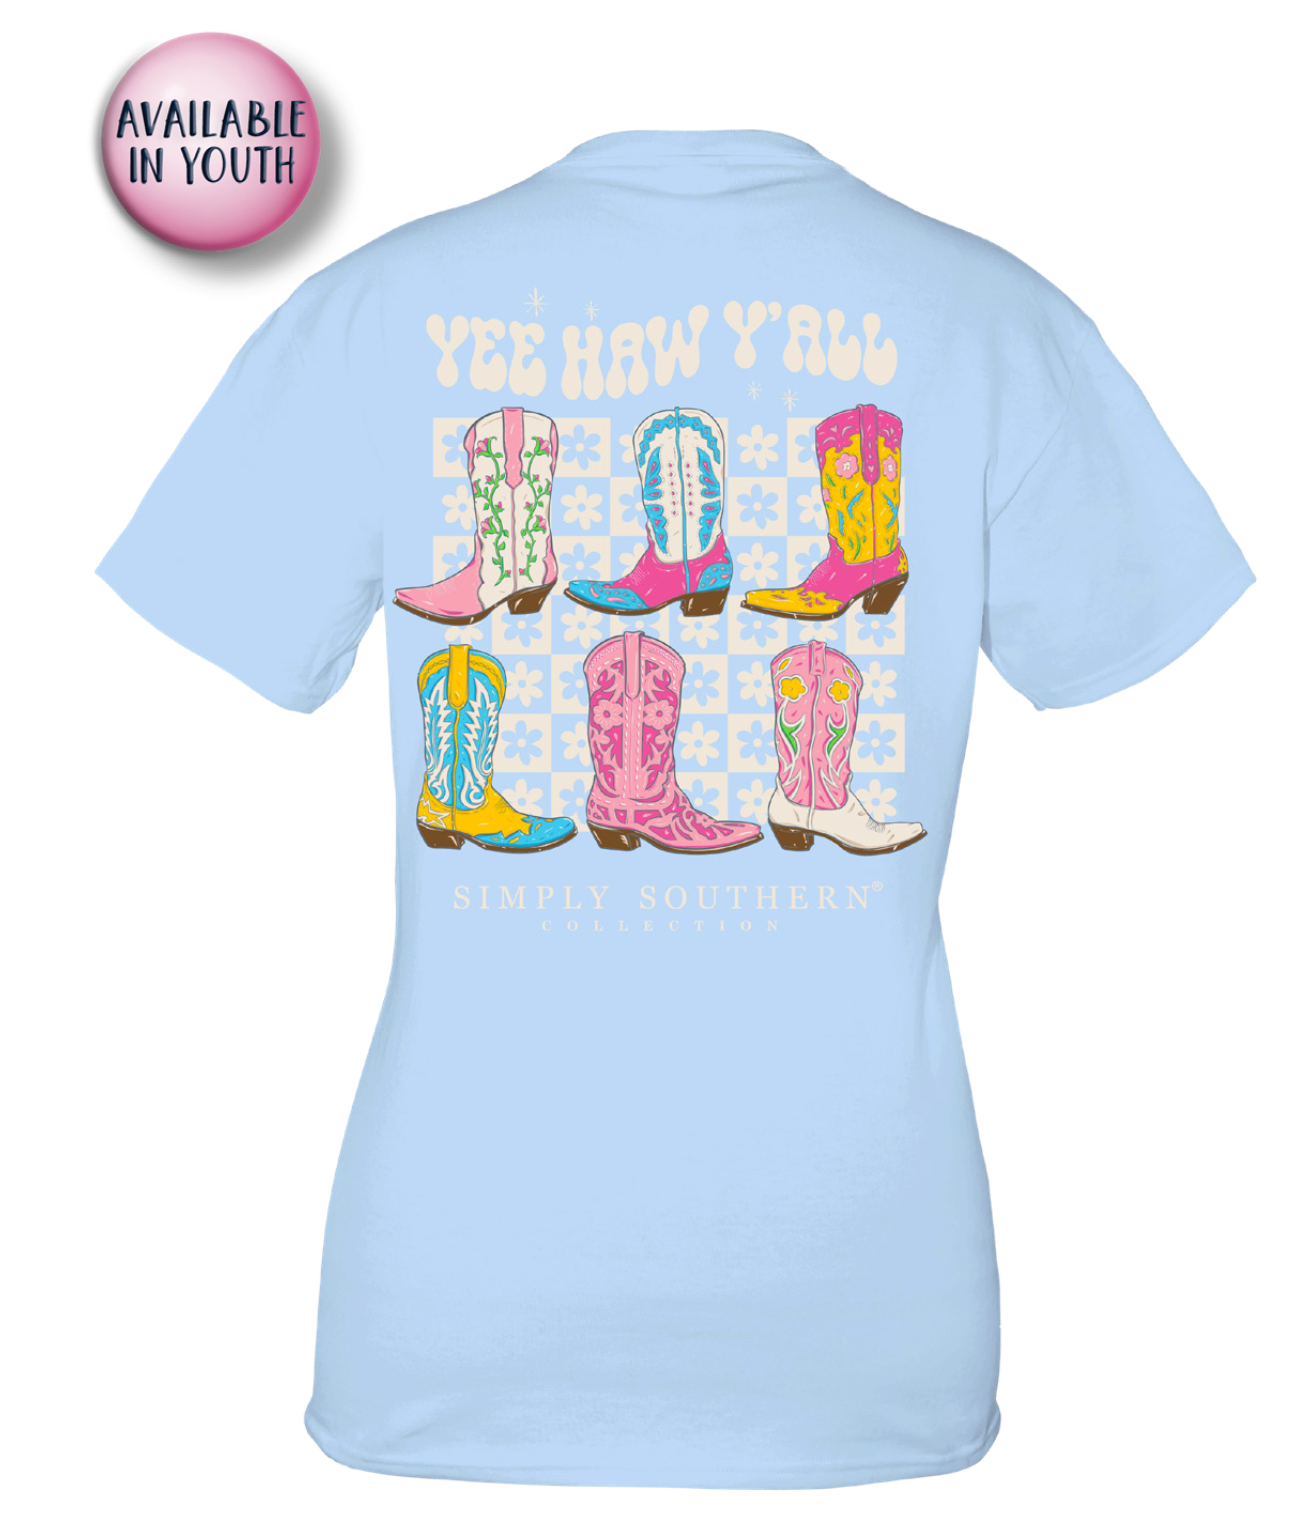 'Yeehaw Y'all' Short Sleeve Tee by Simply Southern